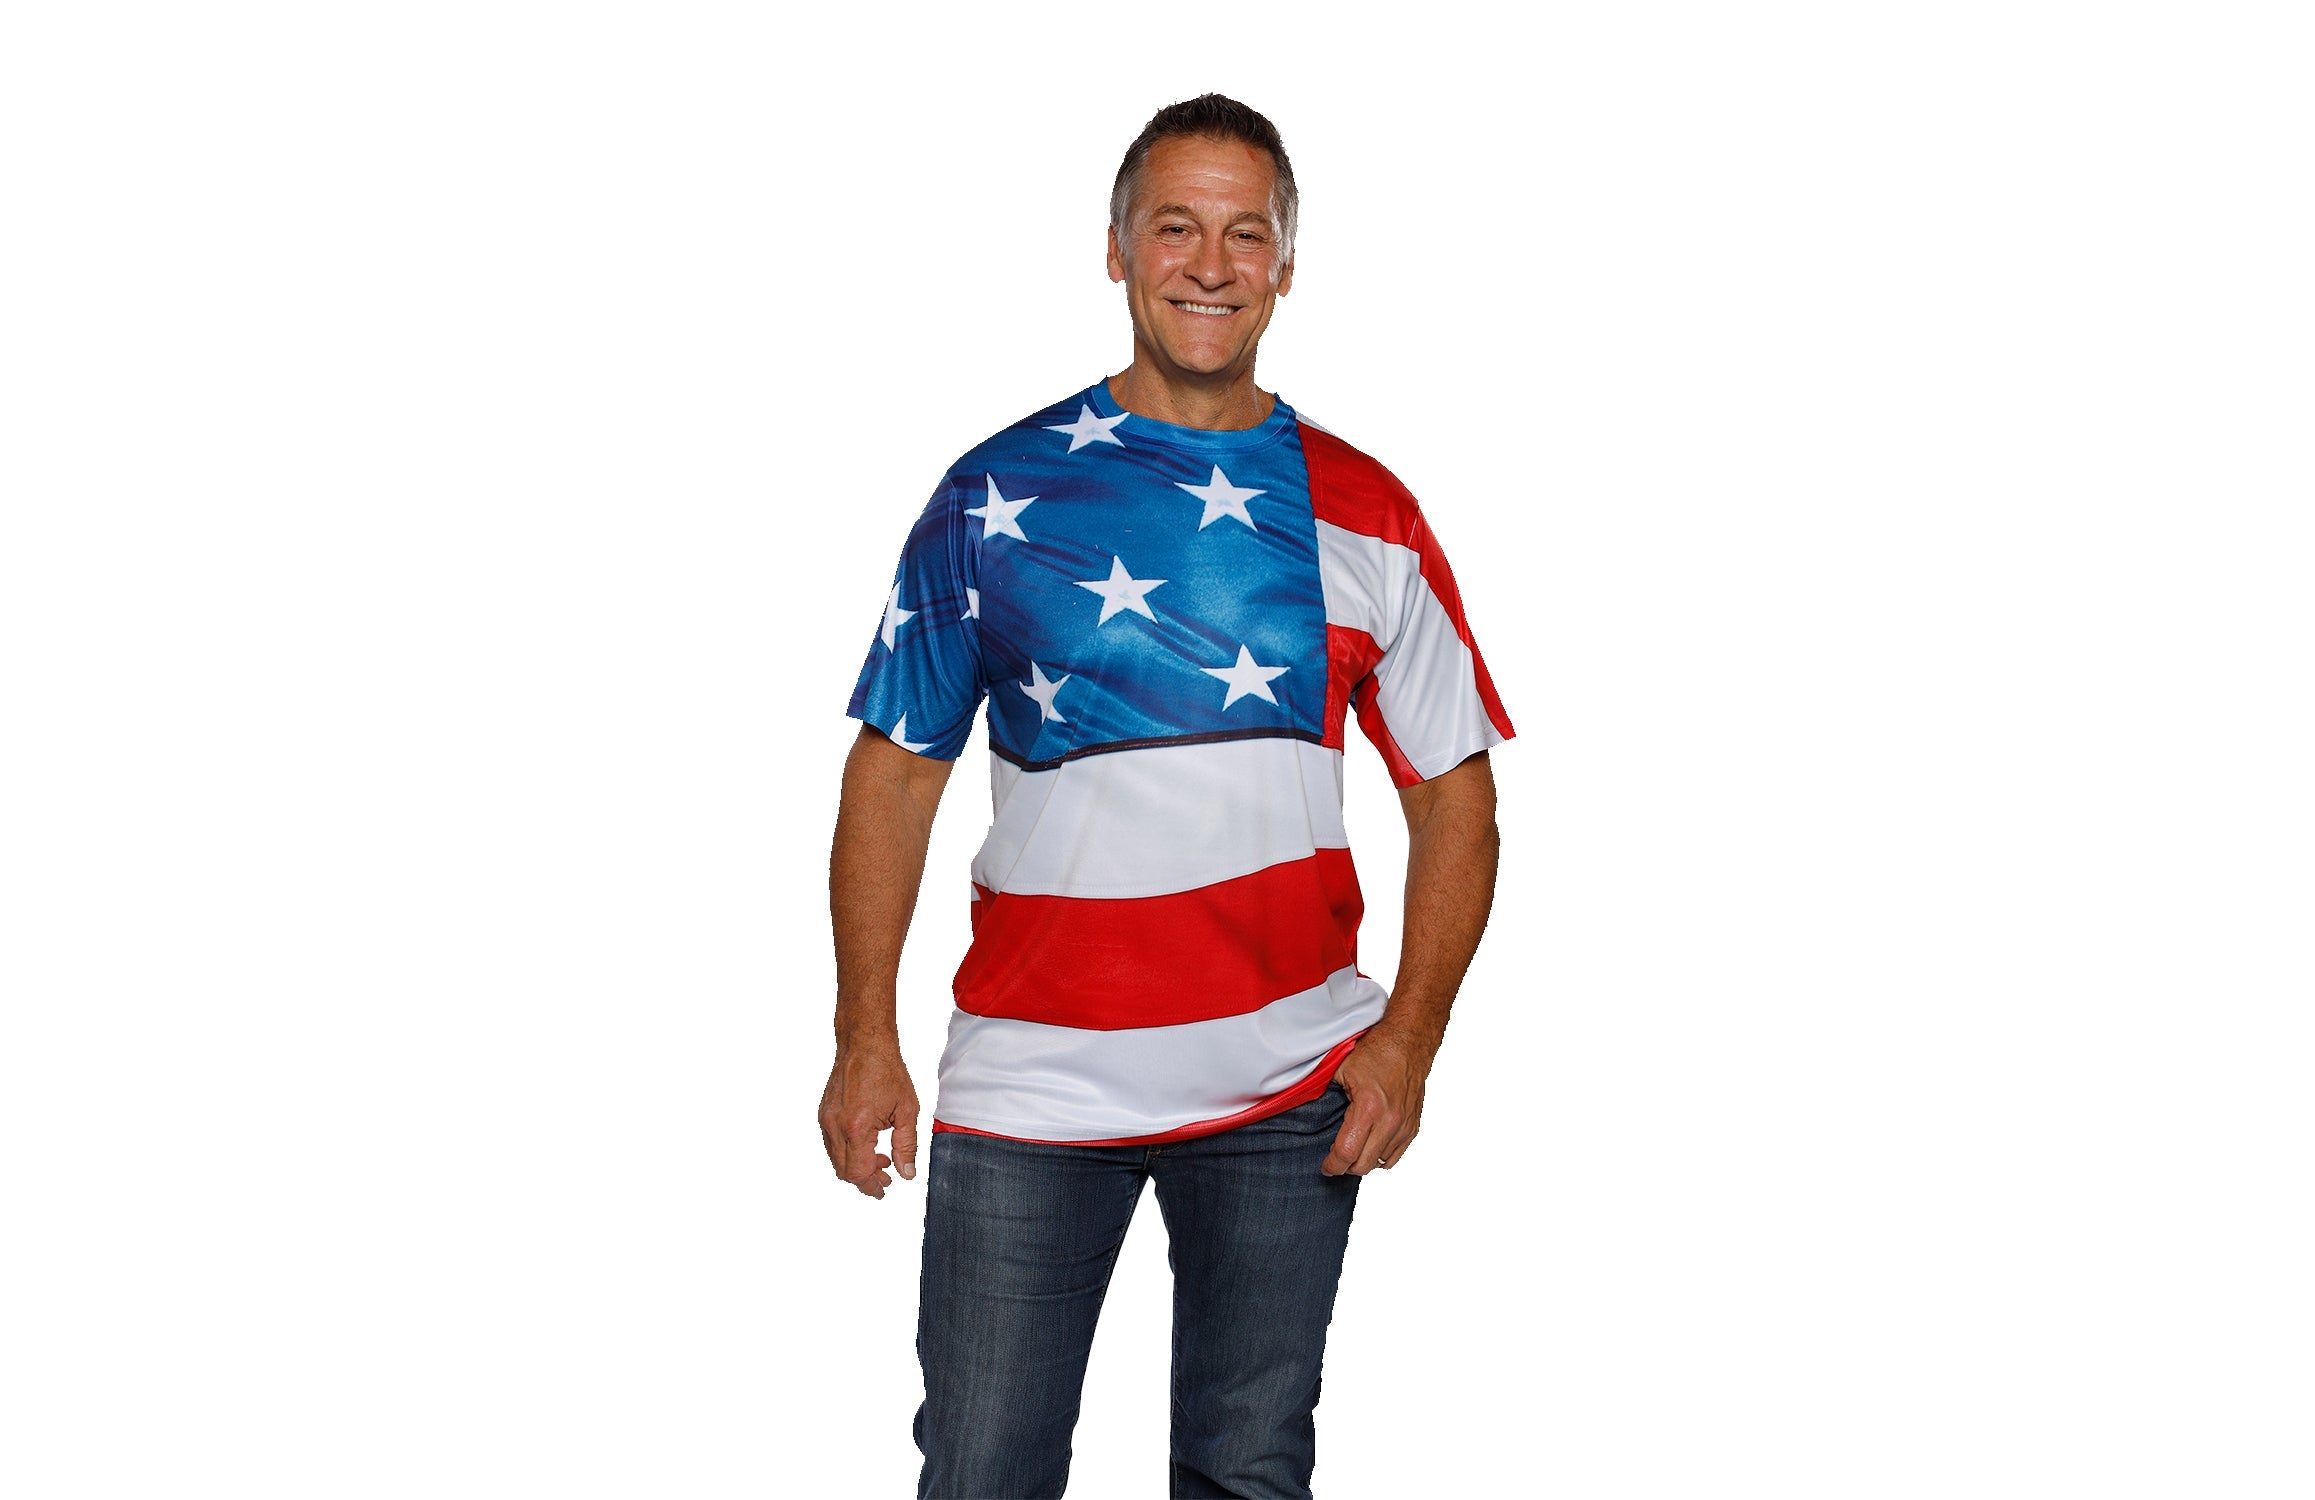 Is It Appropriate to Wear the American Flag as Clothing?